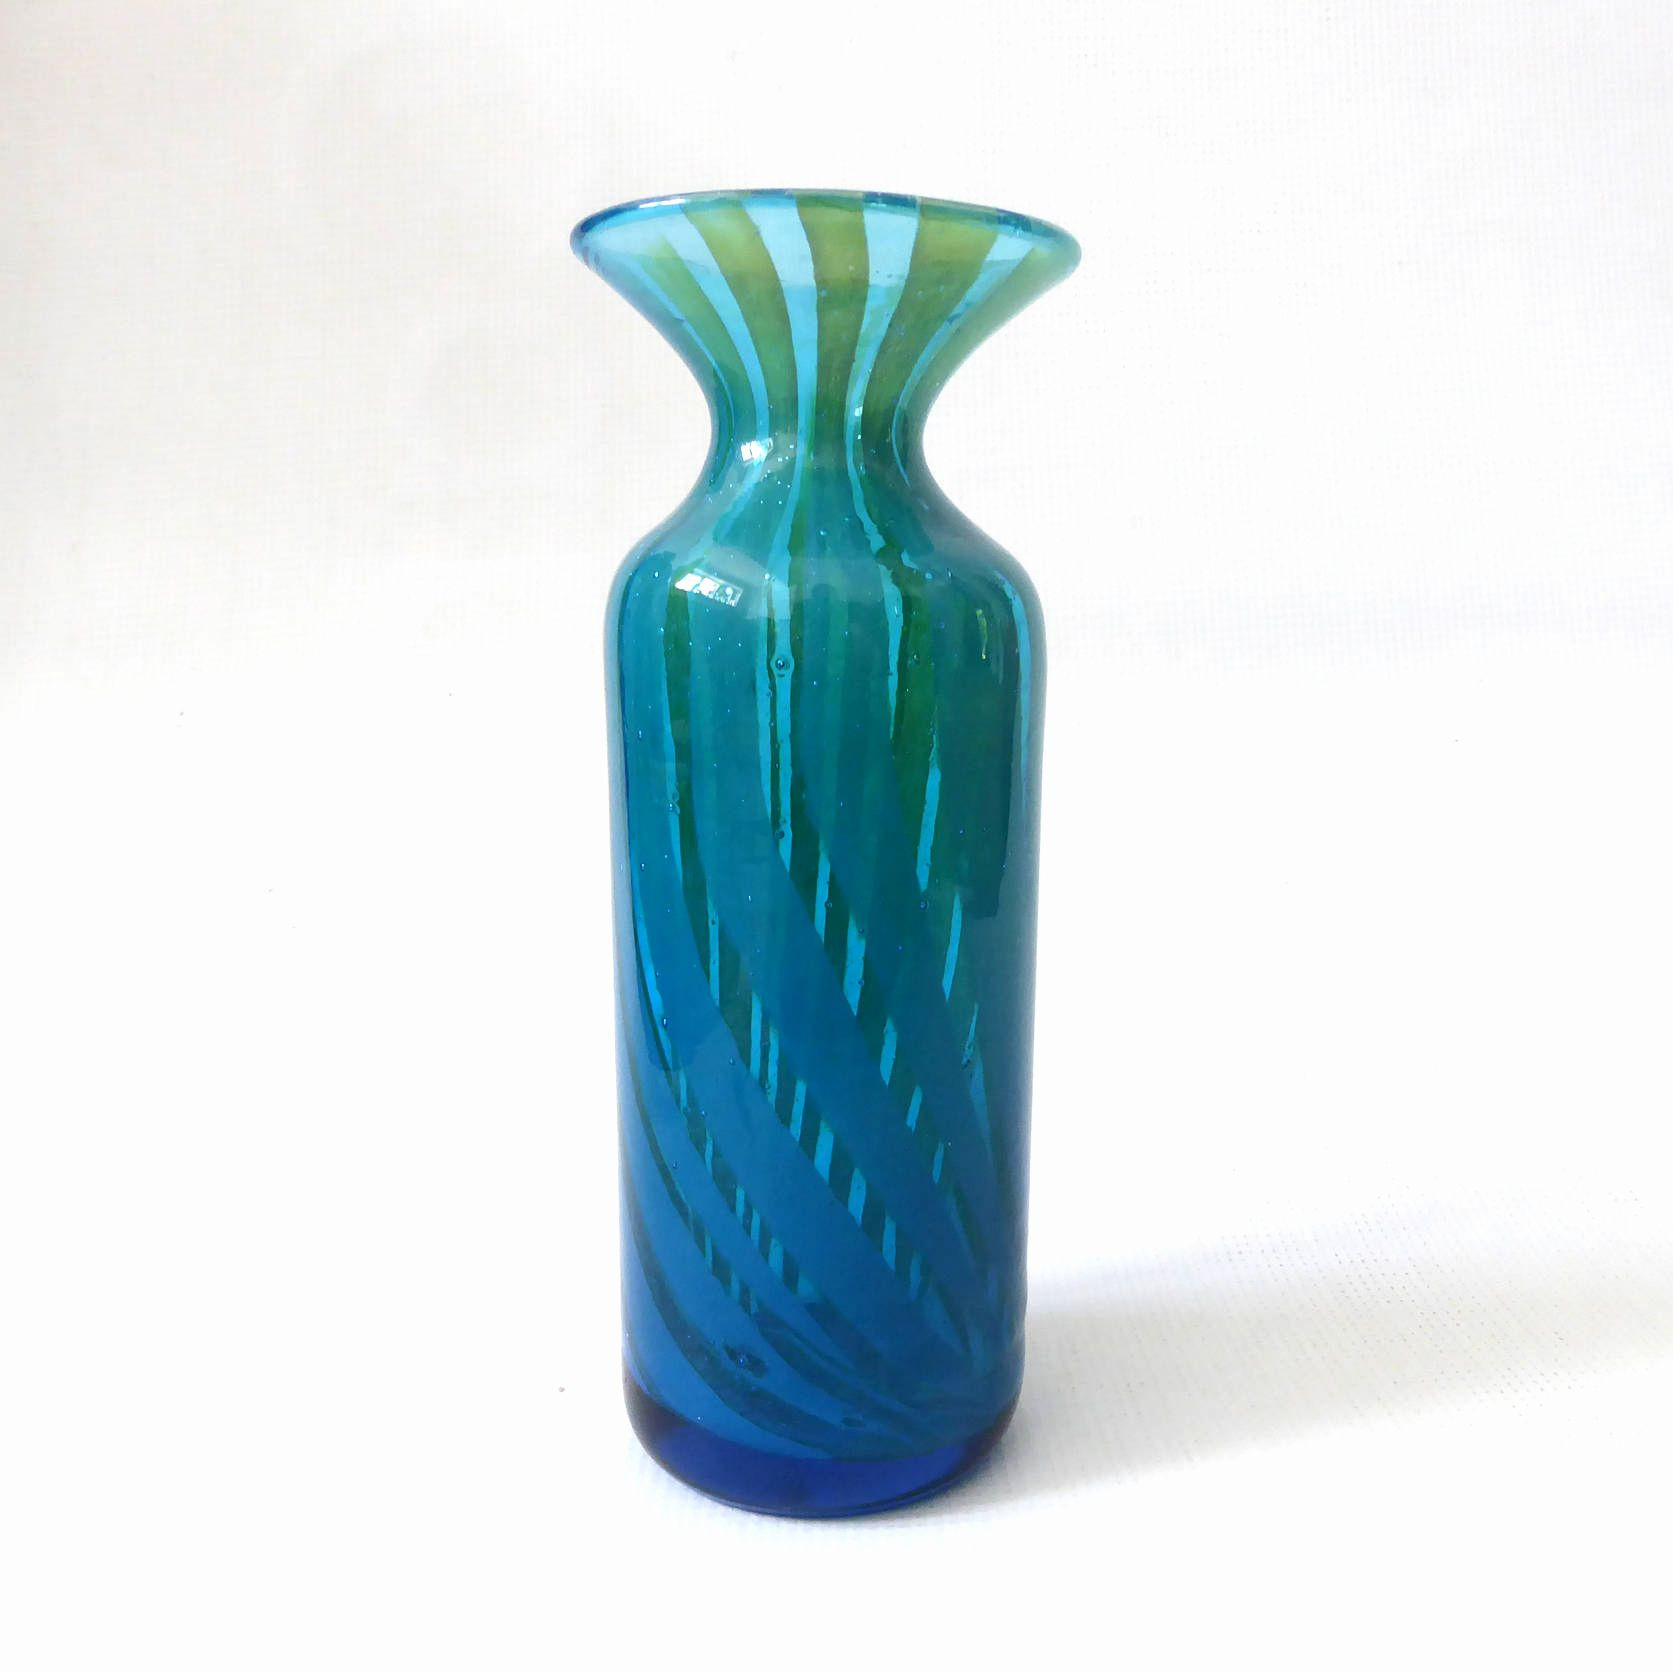 28 Recommended Antique Glass Vases Value 2024 free download antique glass vases value of 35 antique green glass vases the weekly world intended for antique glass vases identify vase and cellar image avorcor